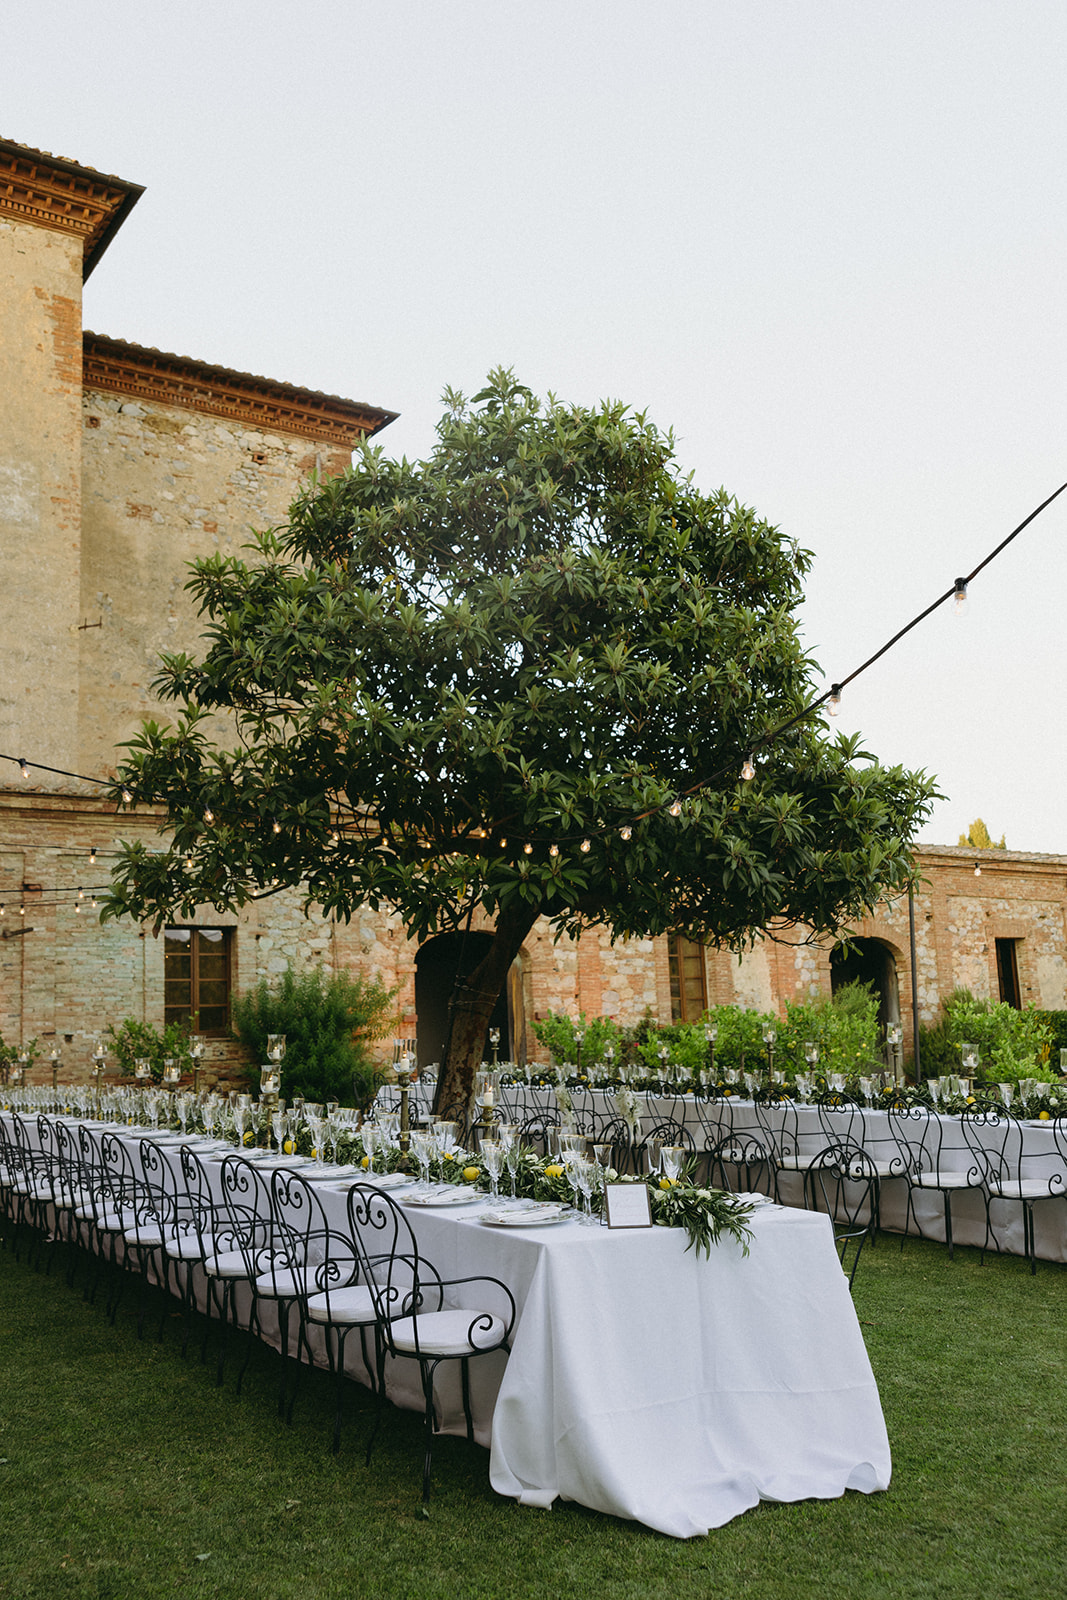 Stunning table setting at a destination wedding in Pienza